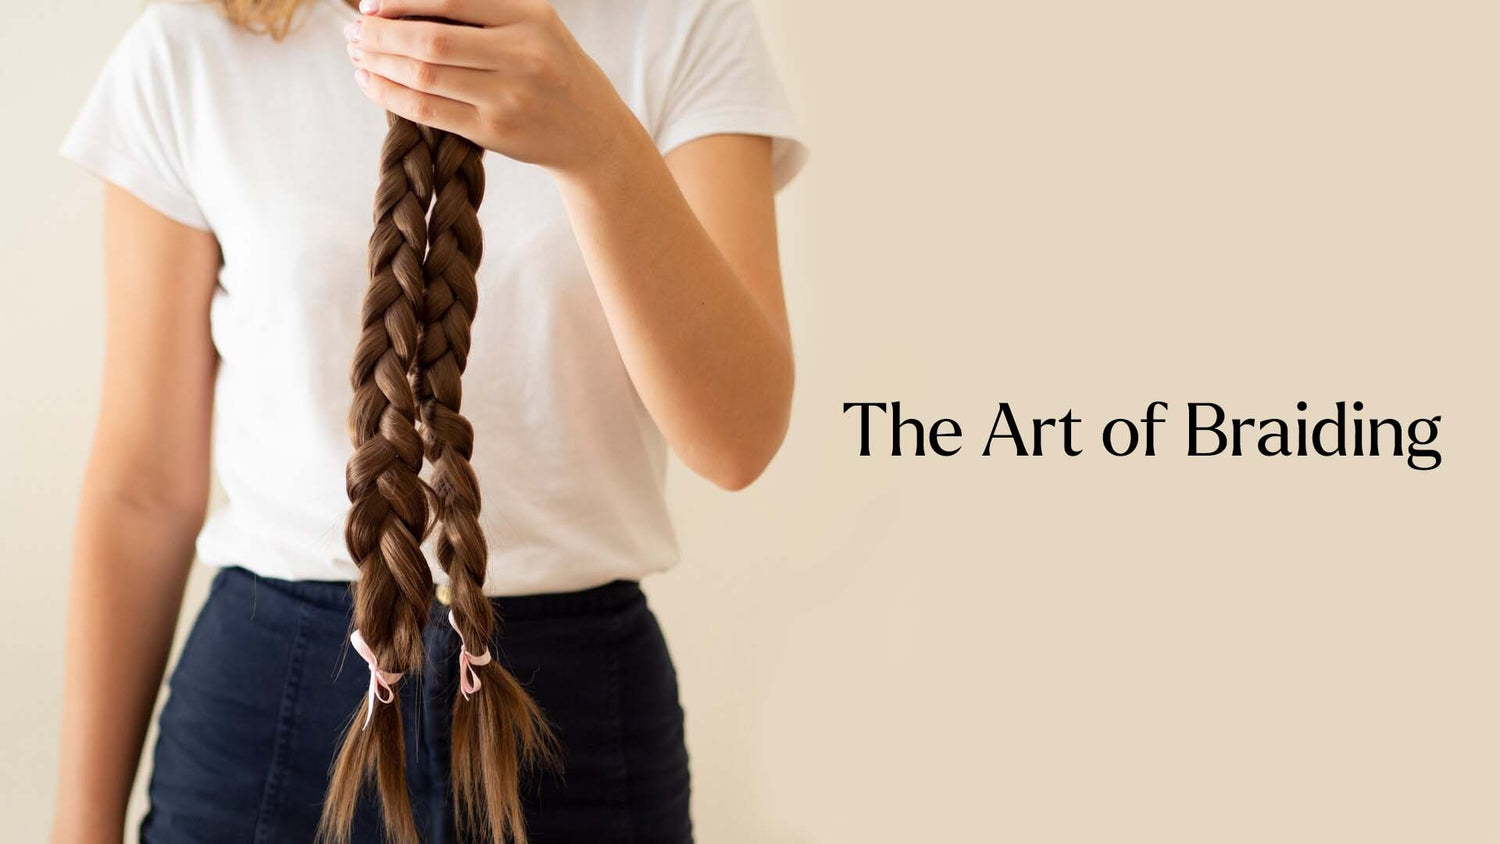 The Art of Braiding: Different Styles and Techniques